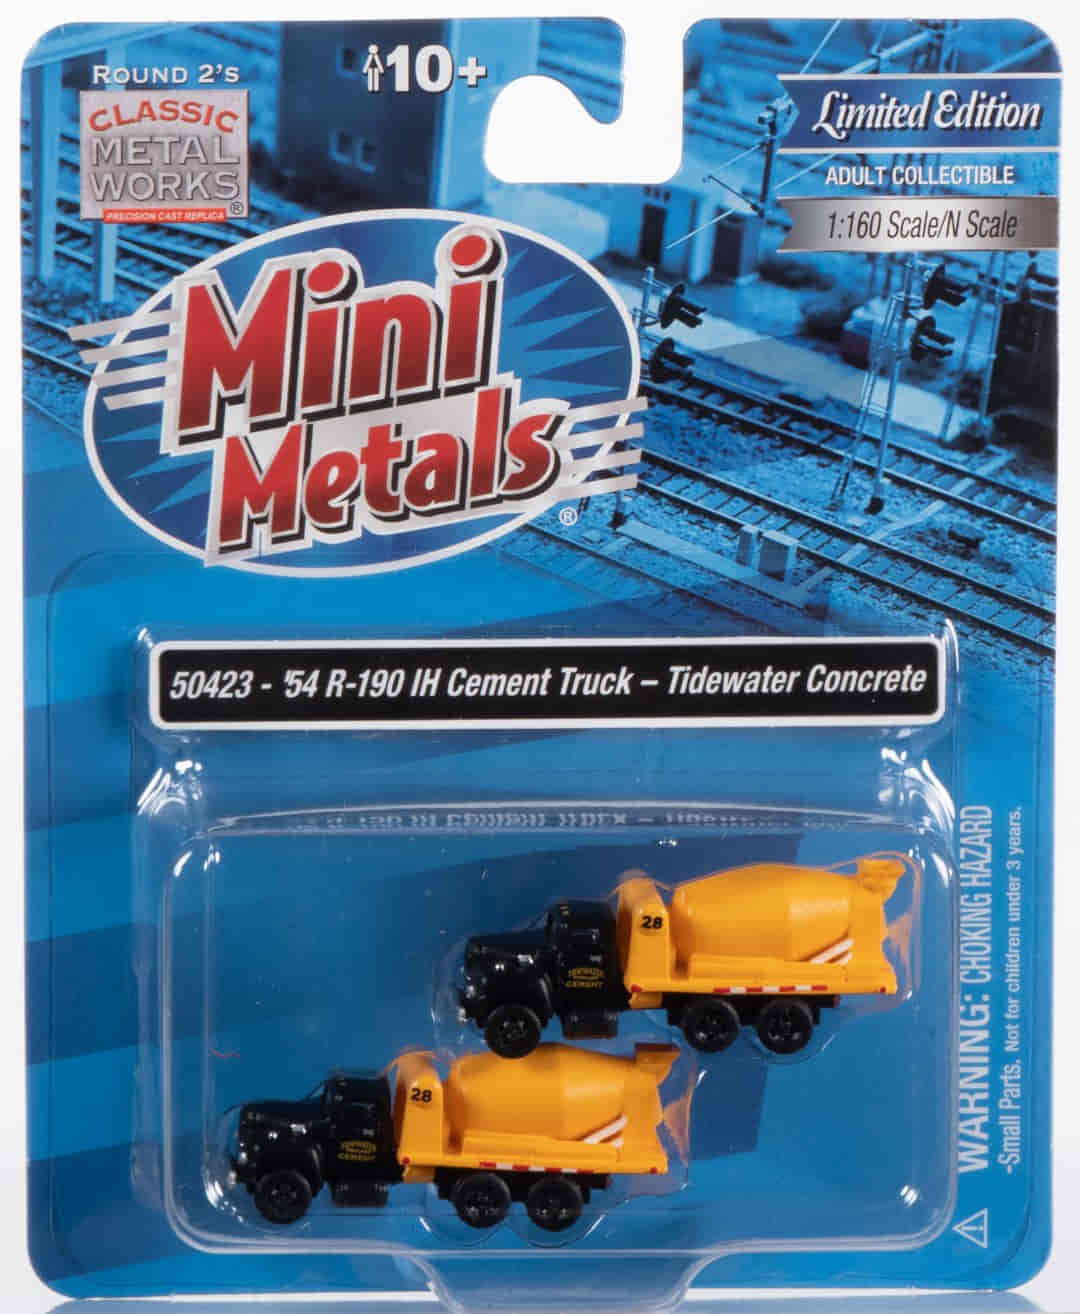 Classic Metal Works 1954 International R-190 Cement/Concrete Tandem HD Truck (Tidewater Concrete) (2-Pack) 1:160 N Scale